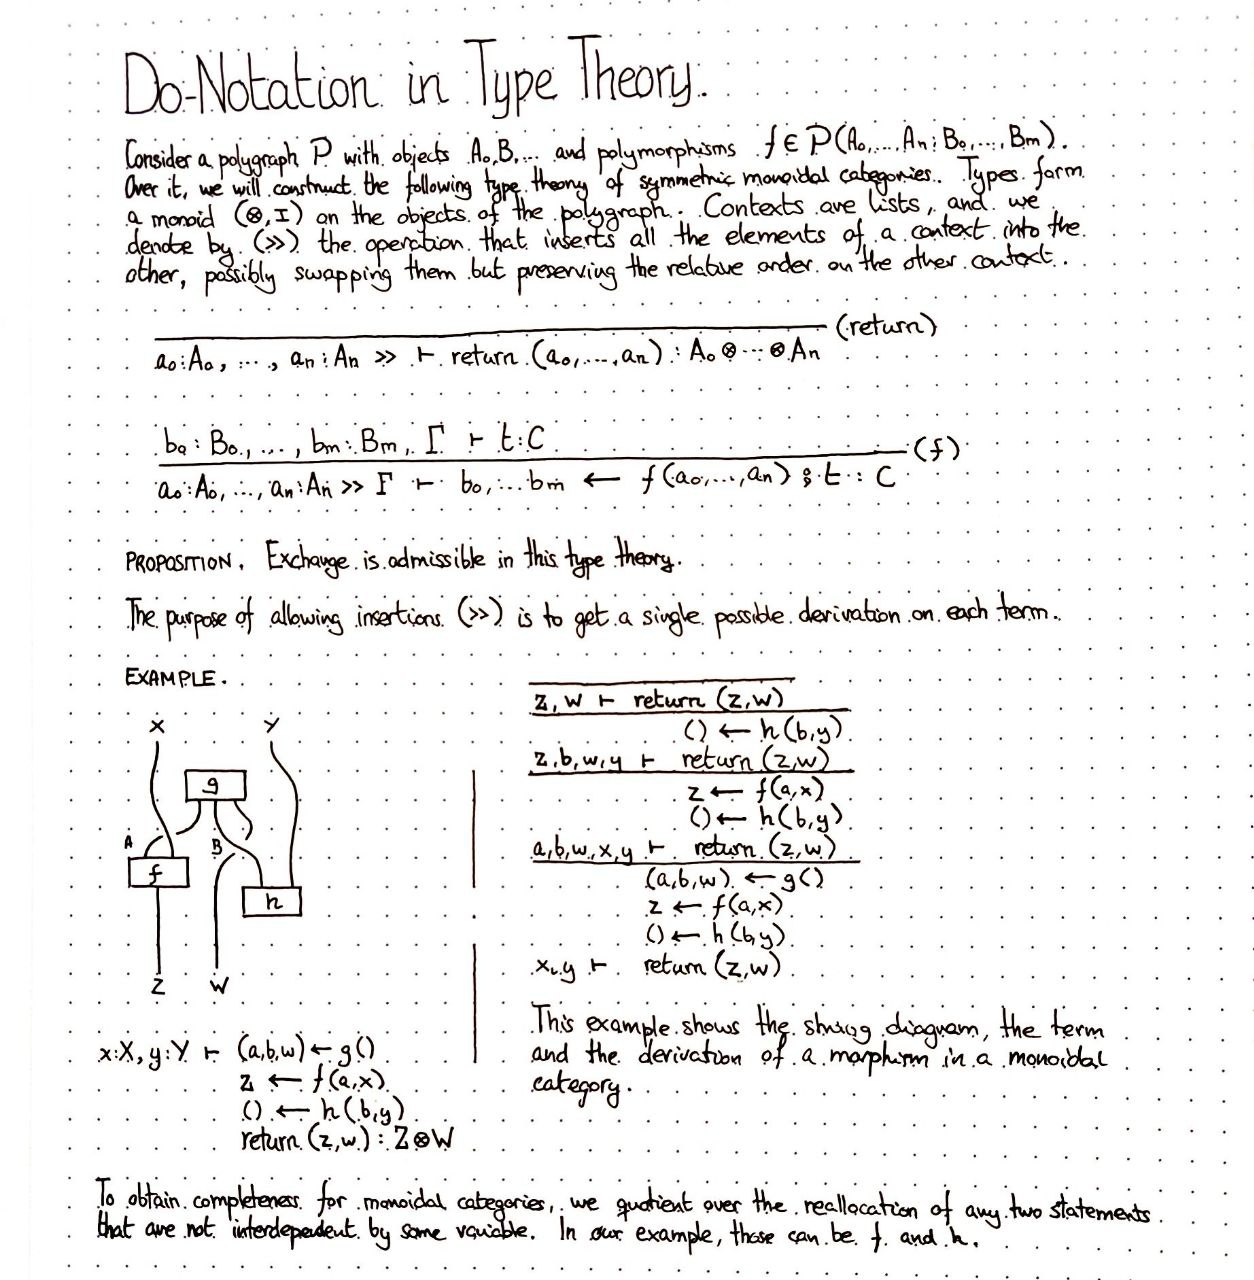 do-notation-in-type-theory